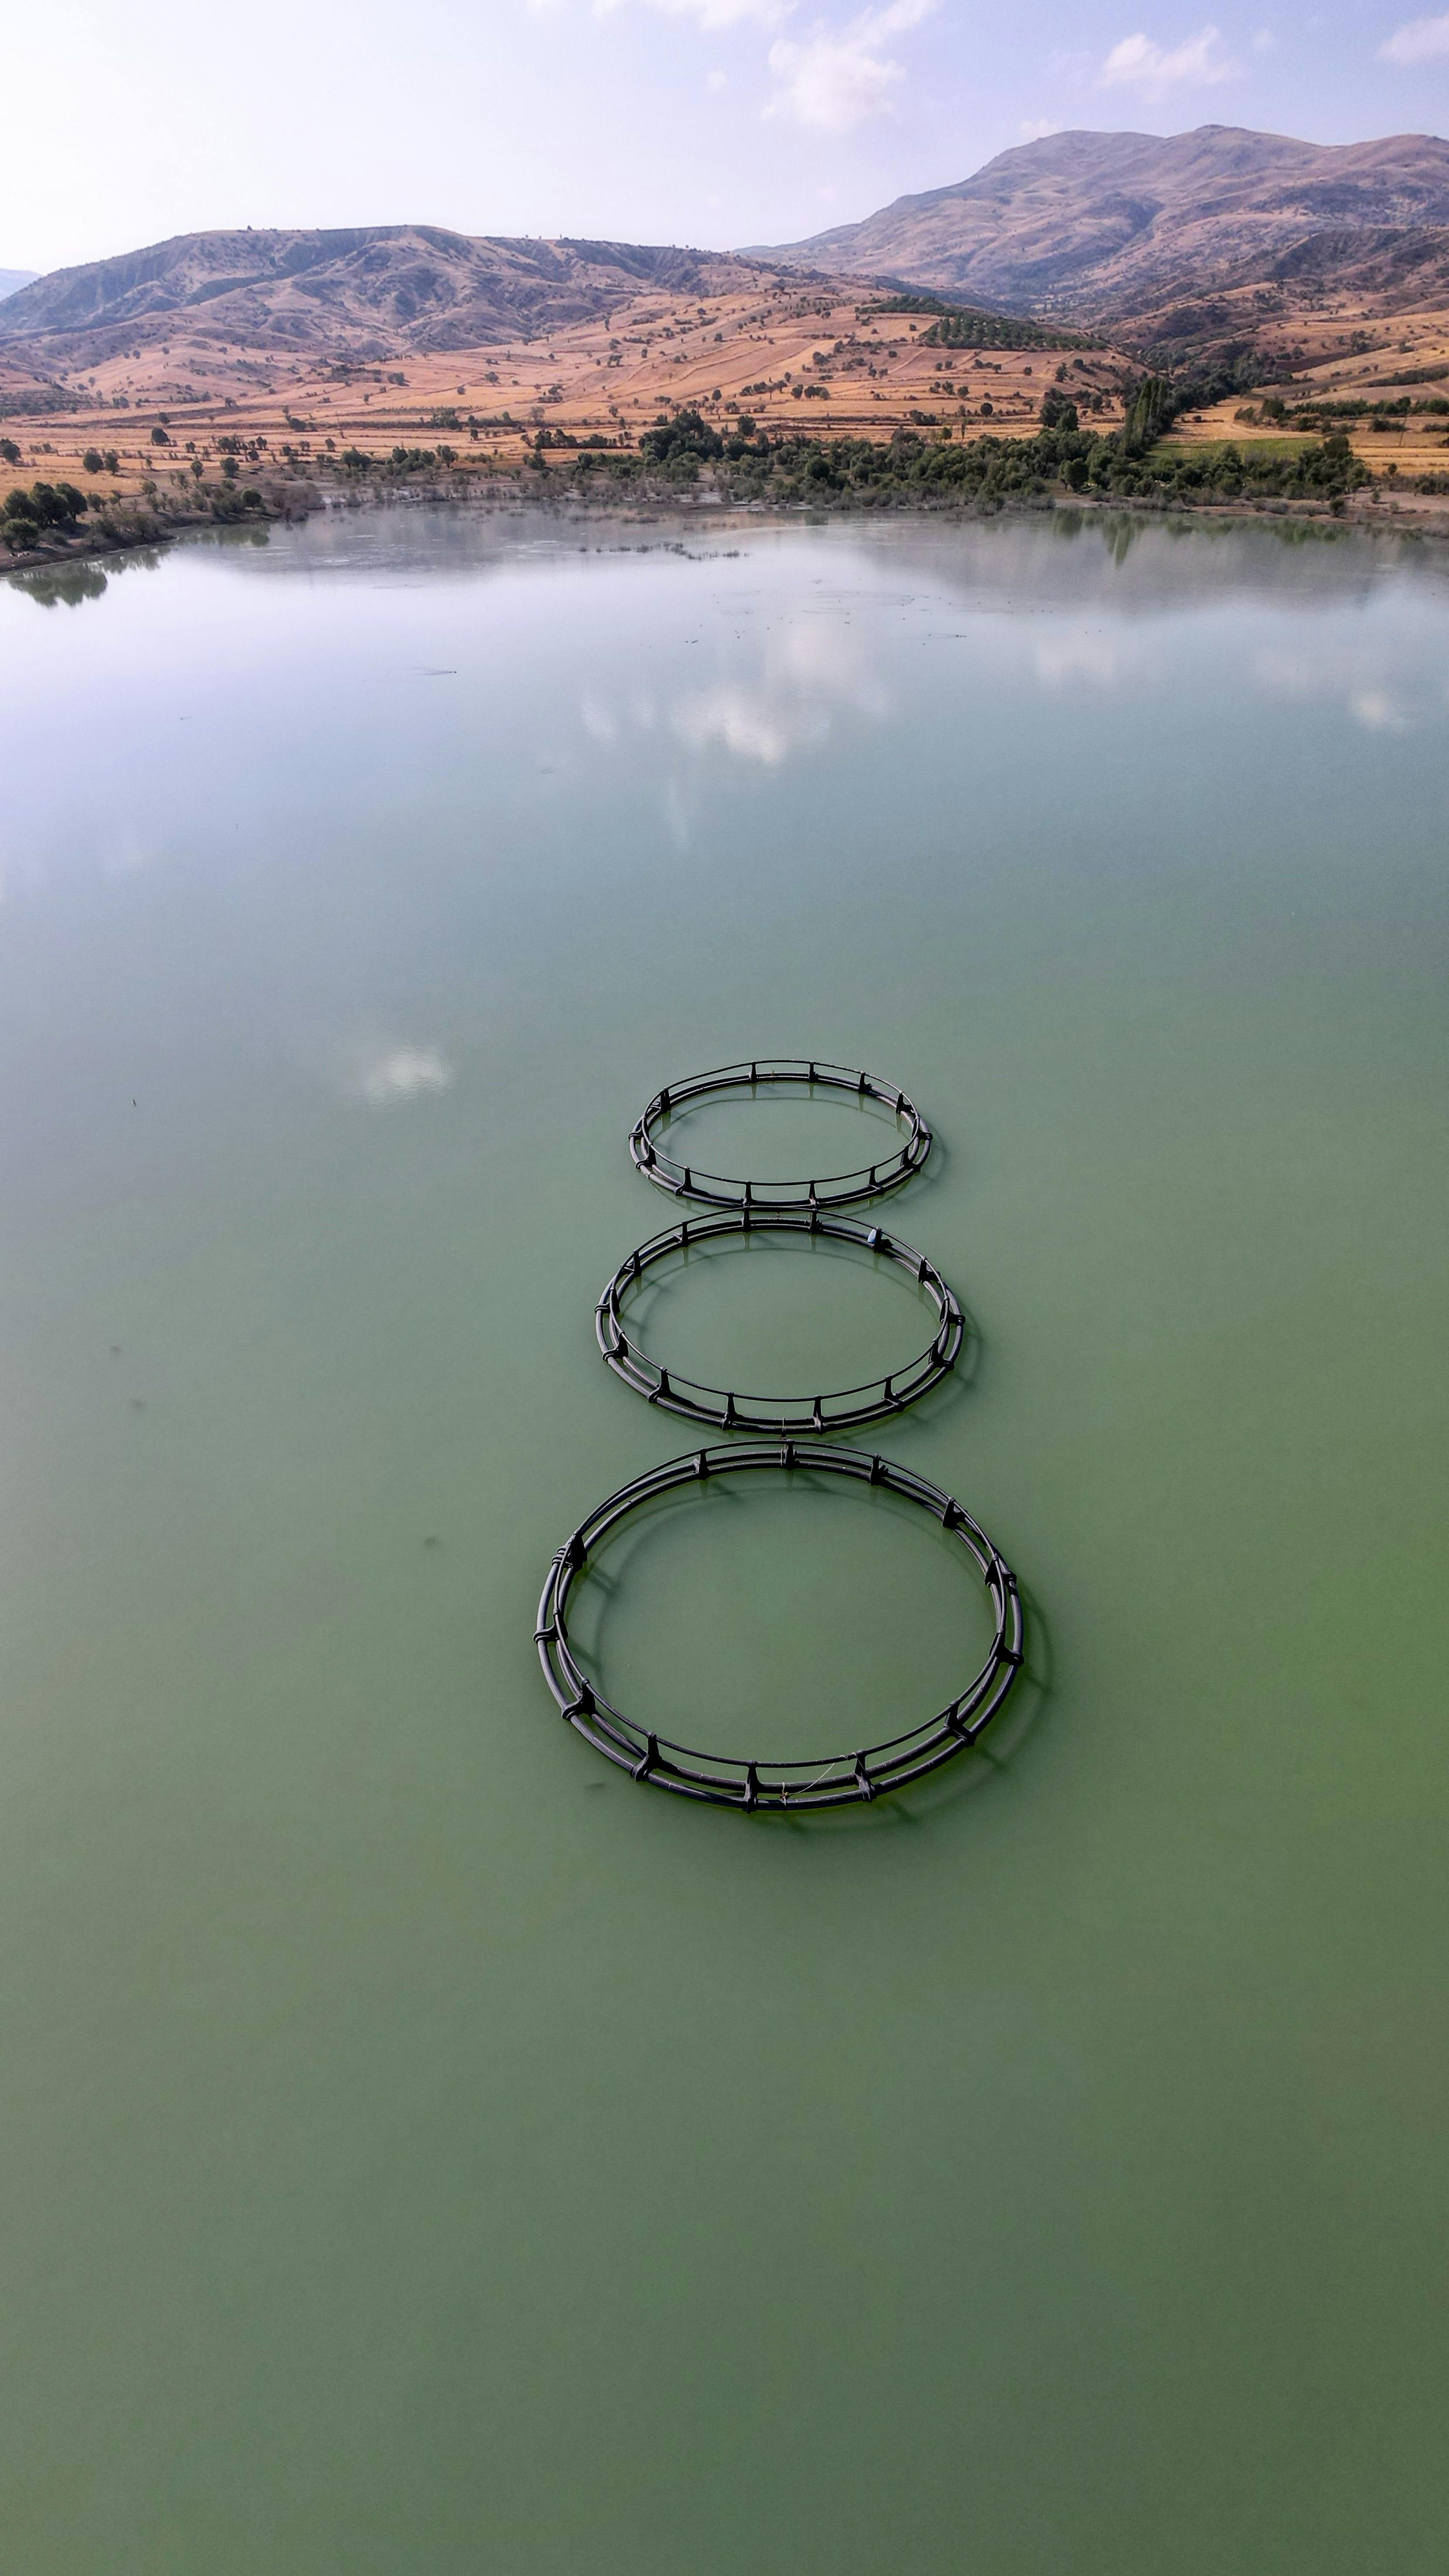 Conductivity Meters are essential for monitoring for metal contamination in fish agriculture